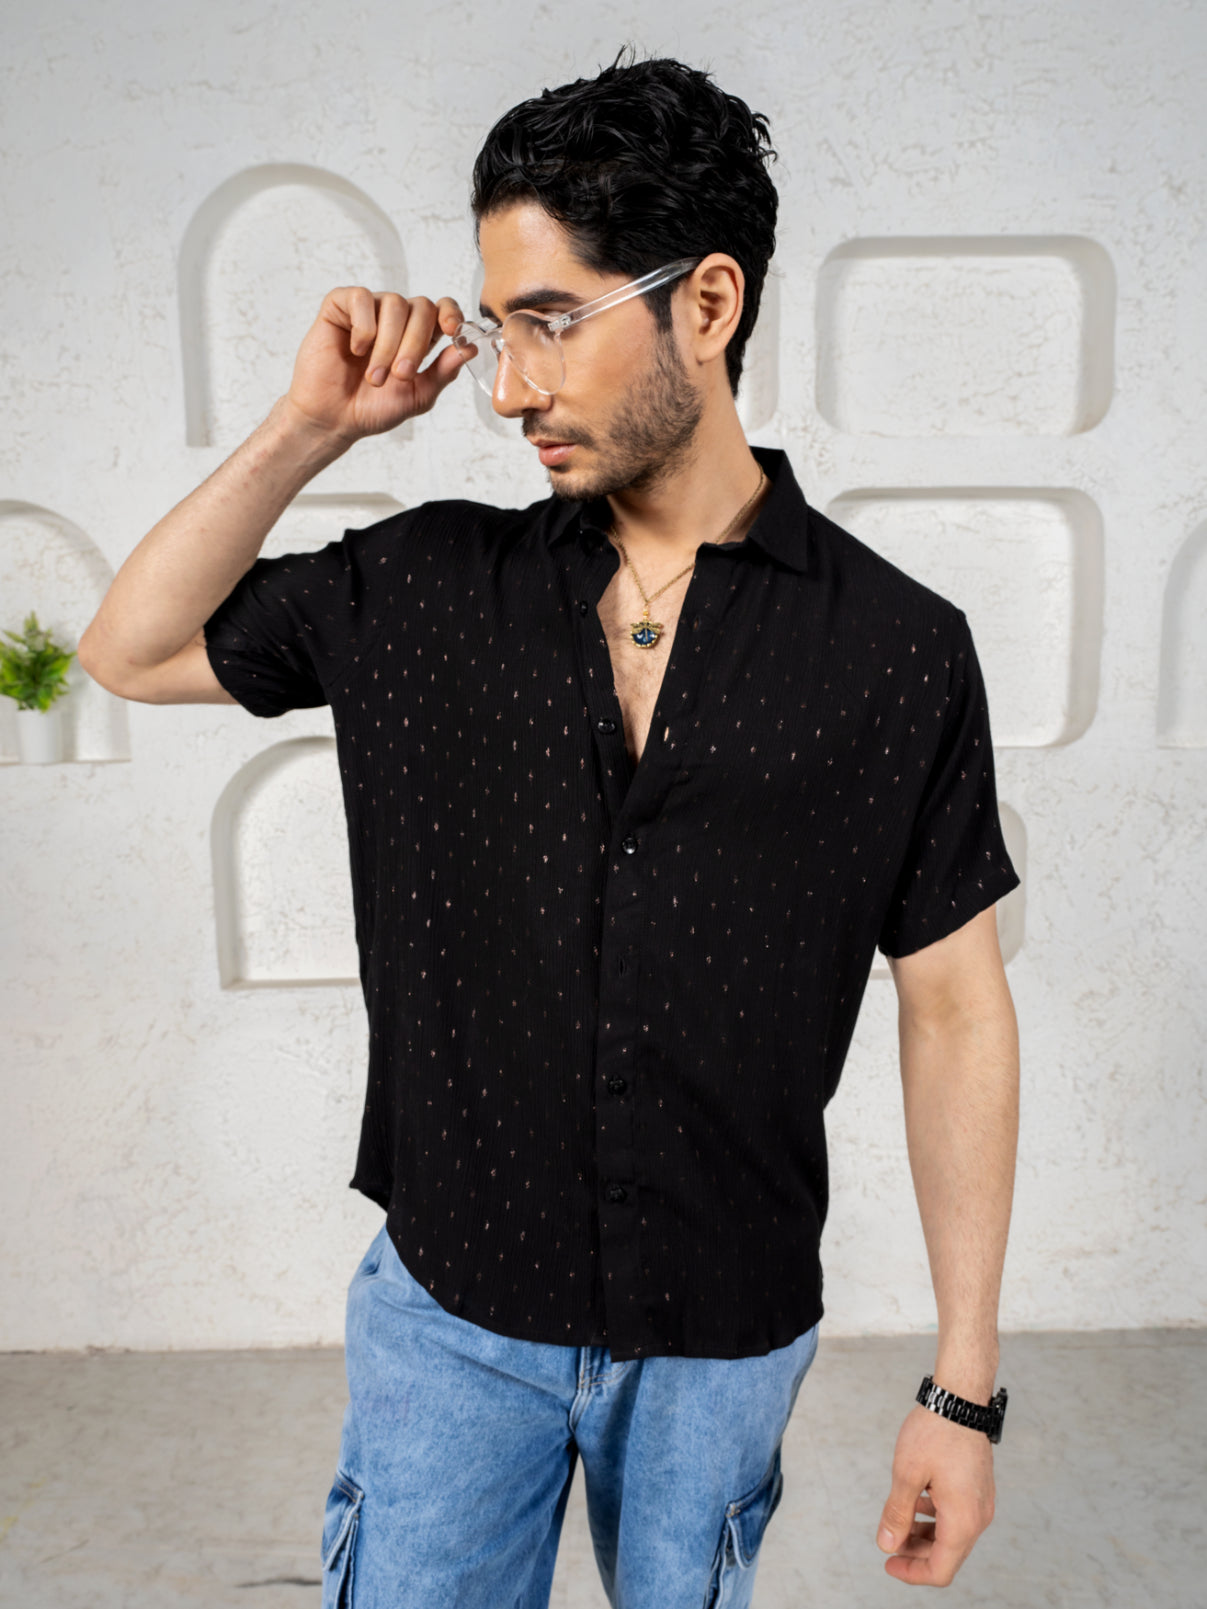 Firangi Yarn Relaxed Fit Super Flowy Re-engineered Cotton Lurex Polka- Half Sleeves Party Shirt Black Copper